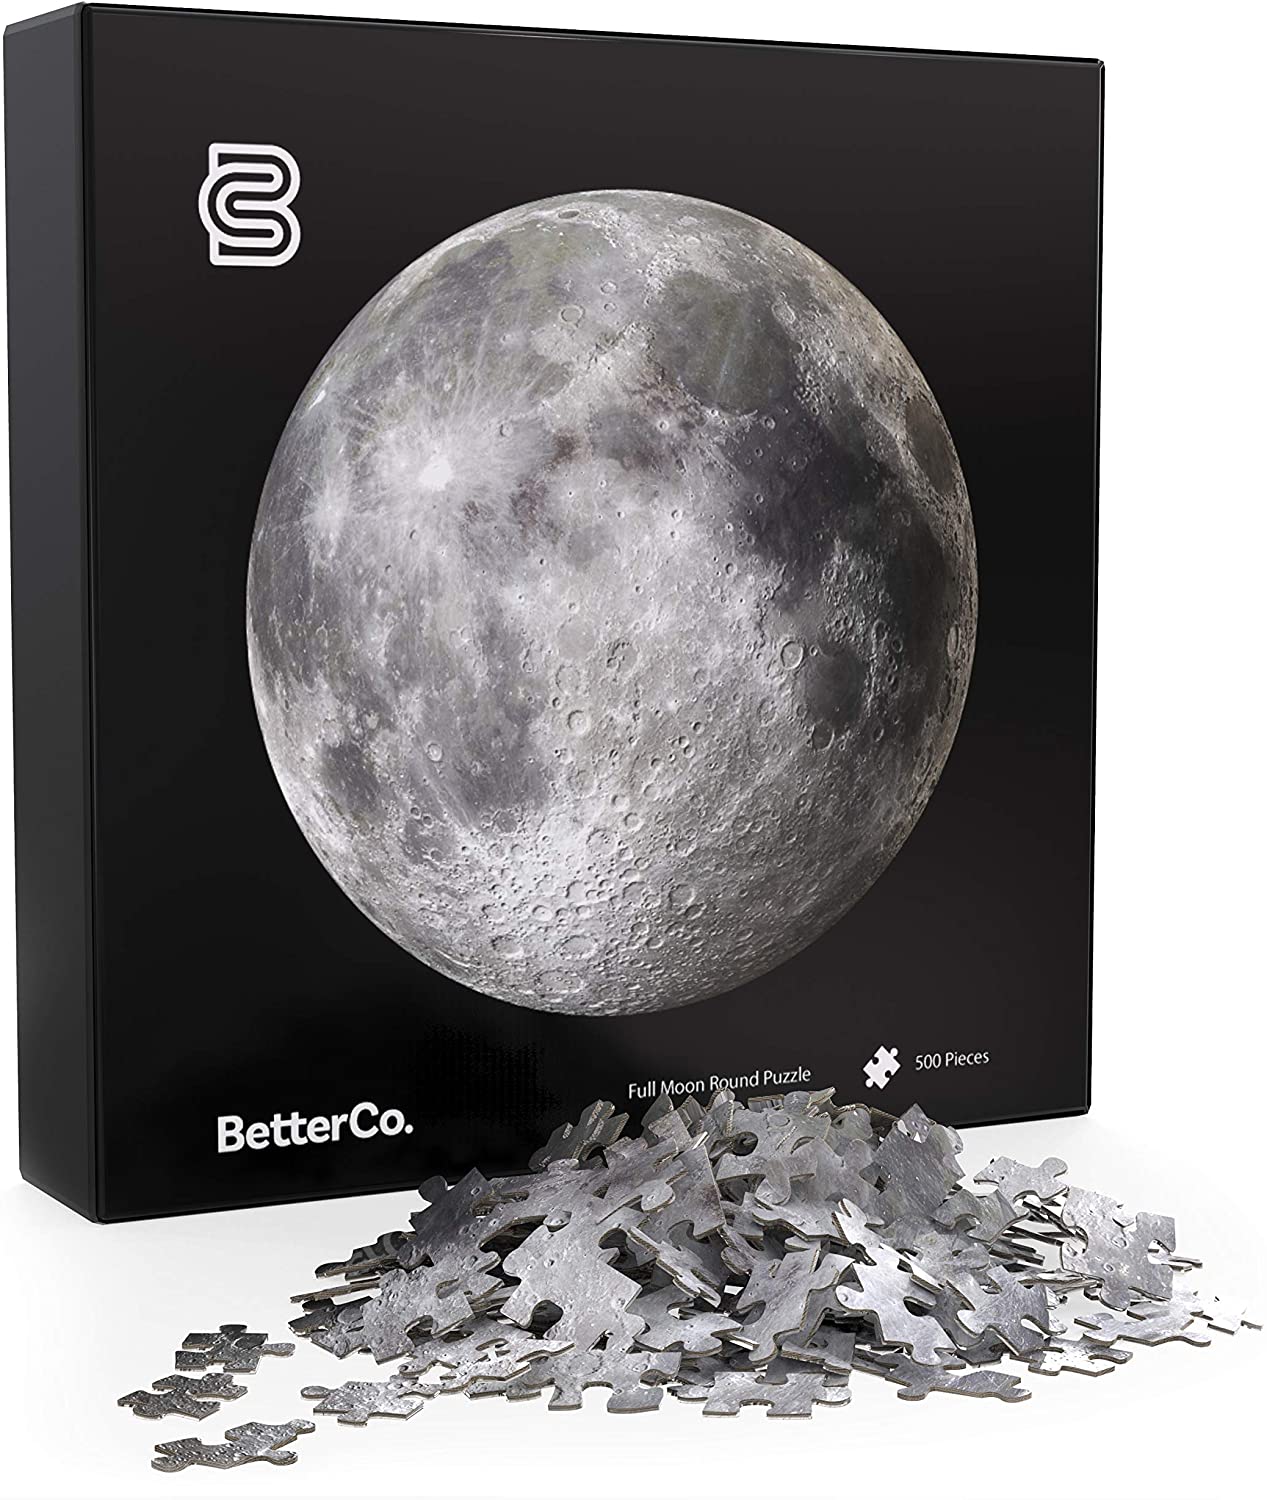 Full Moon Round Puzzle BetterCo Difficult Jigsaw Puzzles 500 Pieces with